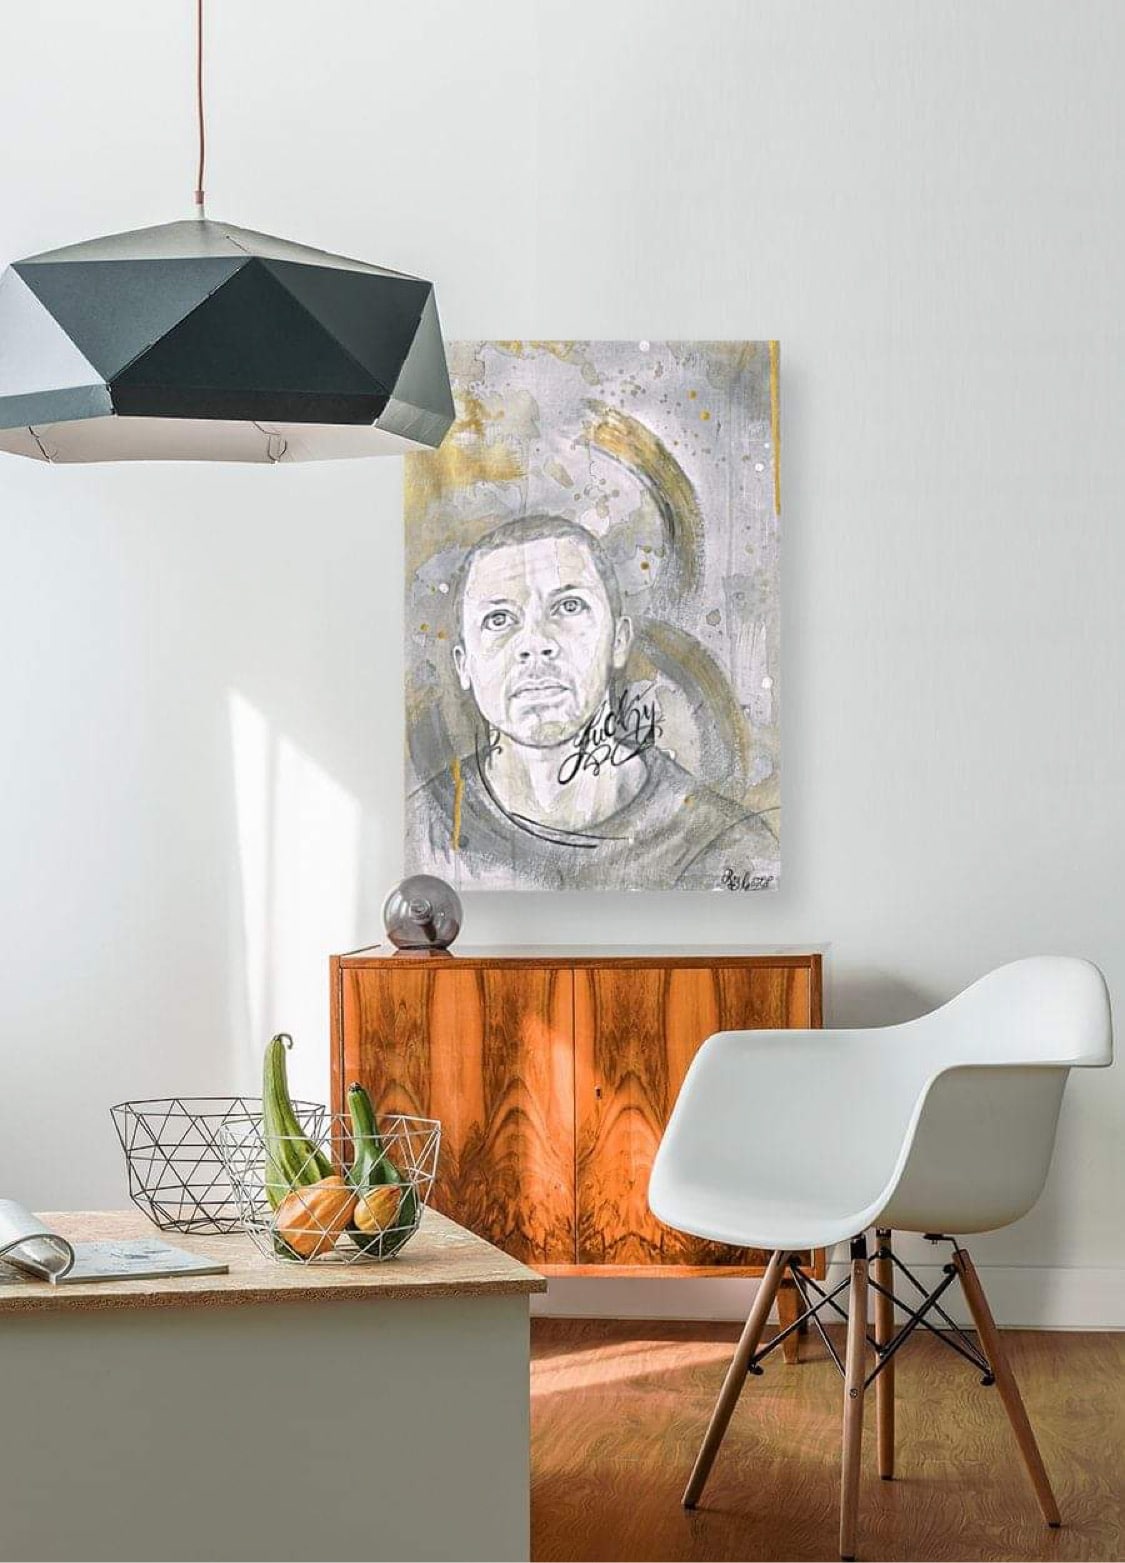 Photo of a room with a brown side table against a white wall. Above the side table is a drawing of the singer Will Young.